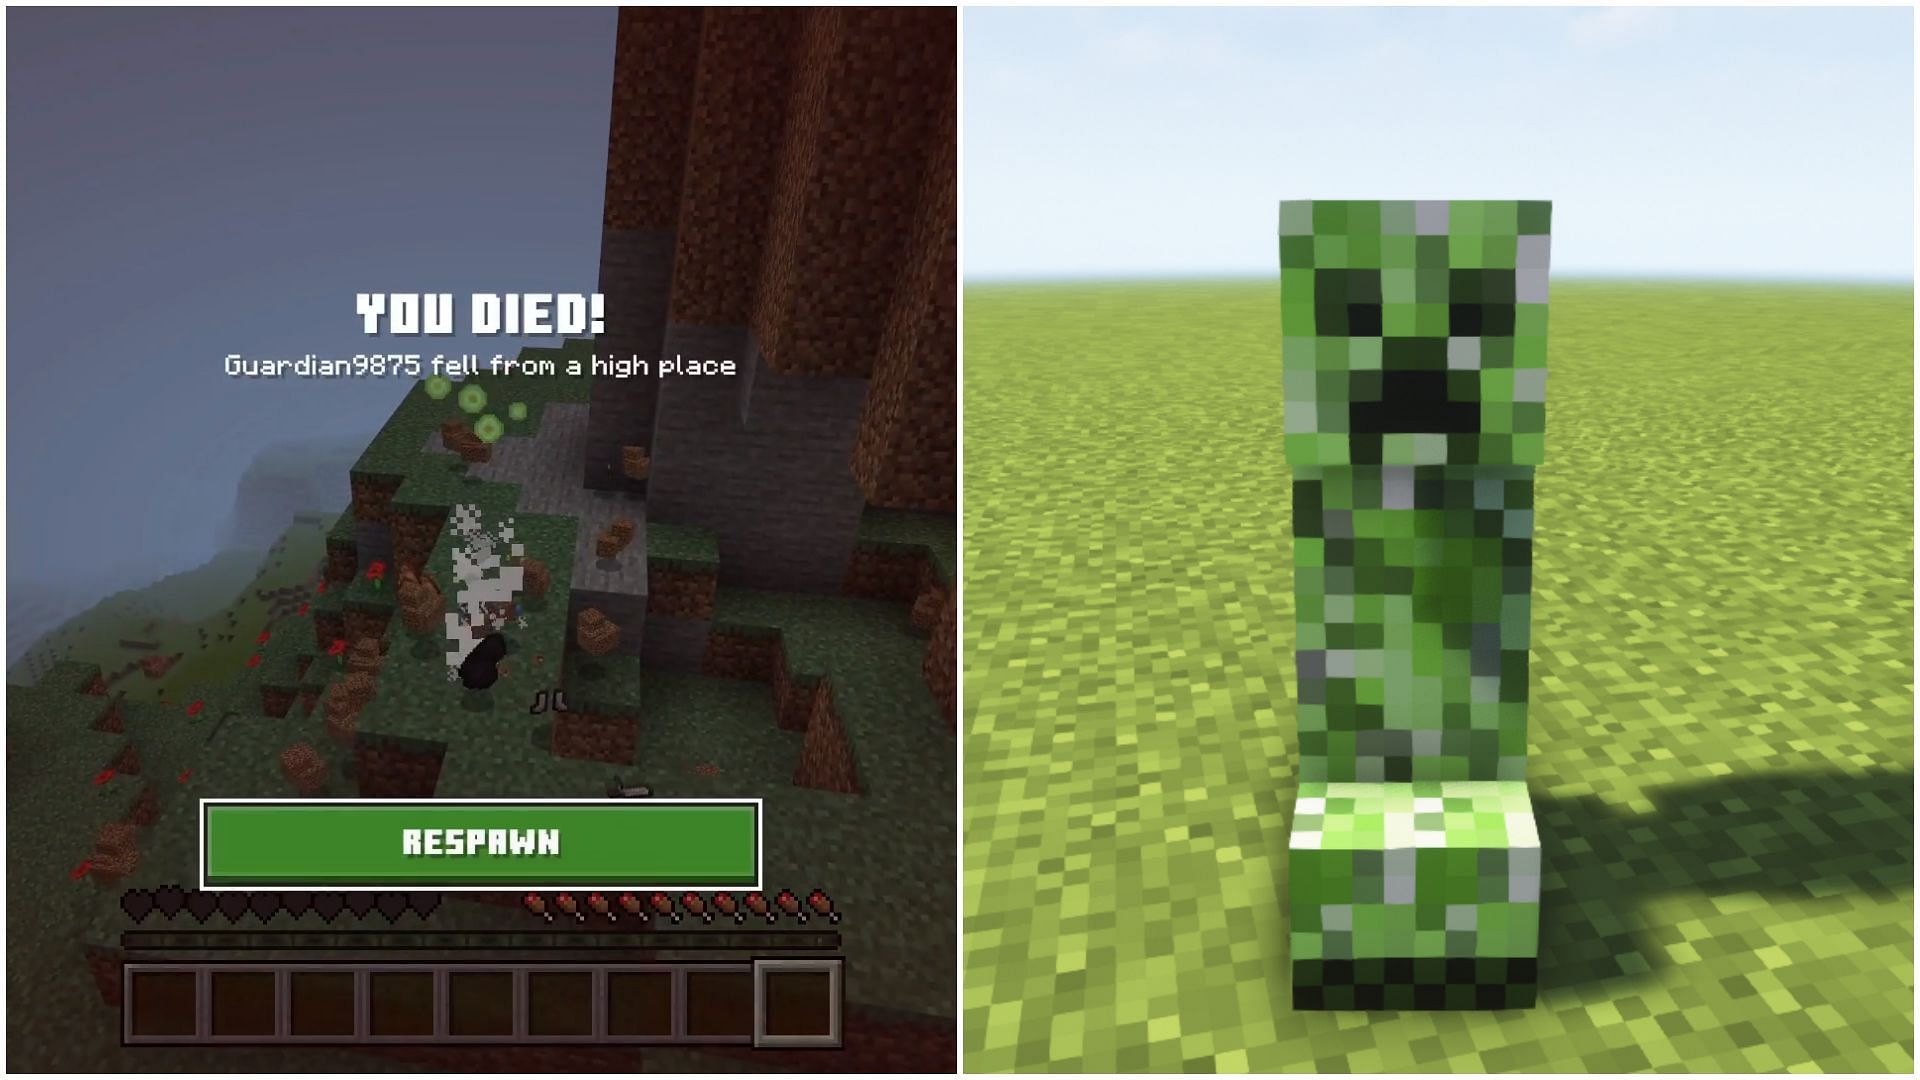 Minecraft Redditor hilariously gets launched by a creeper explosion (Images via Mojang and Reddit/u/Infinity_Guardian)